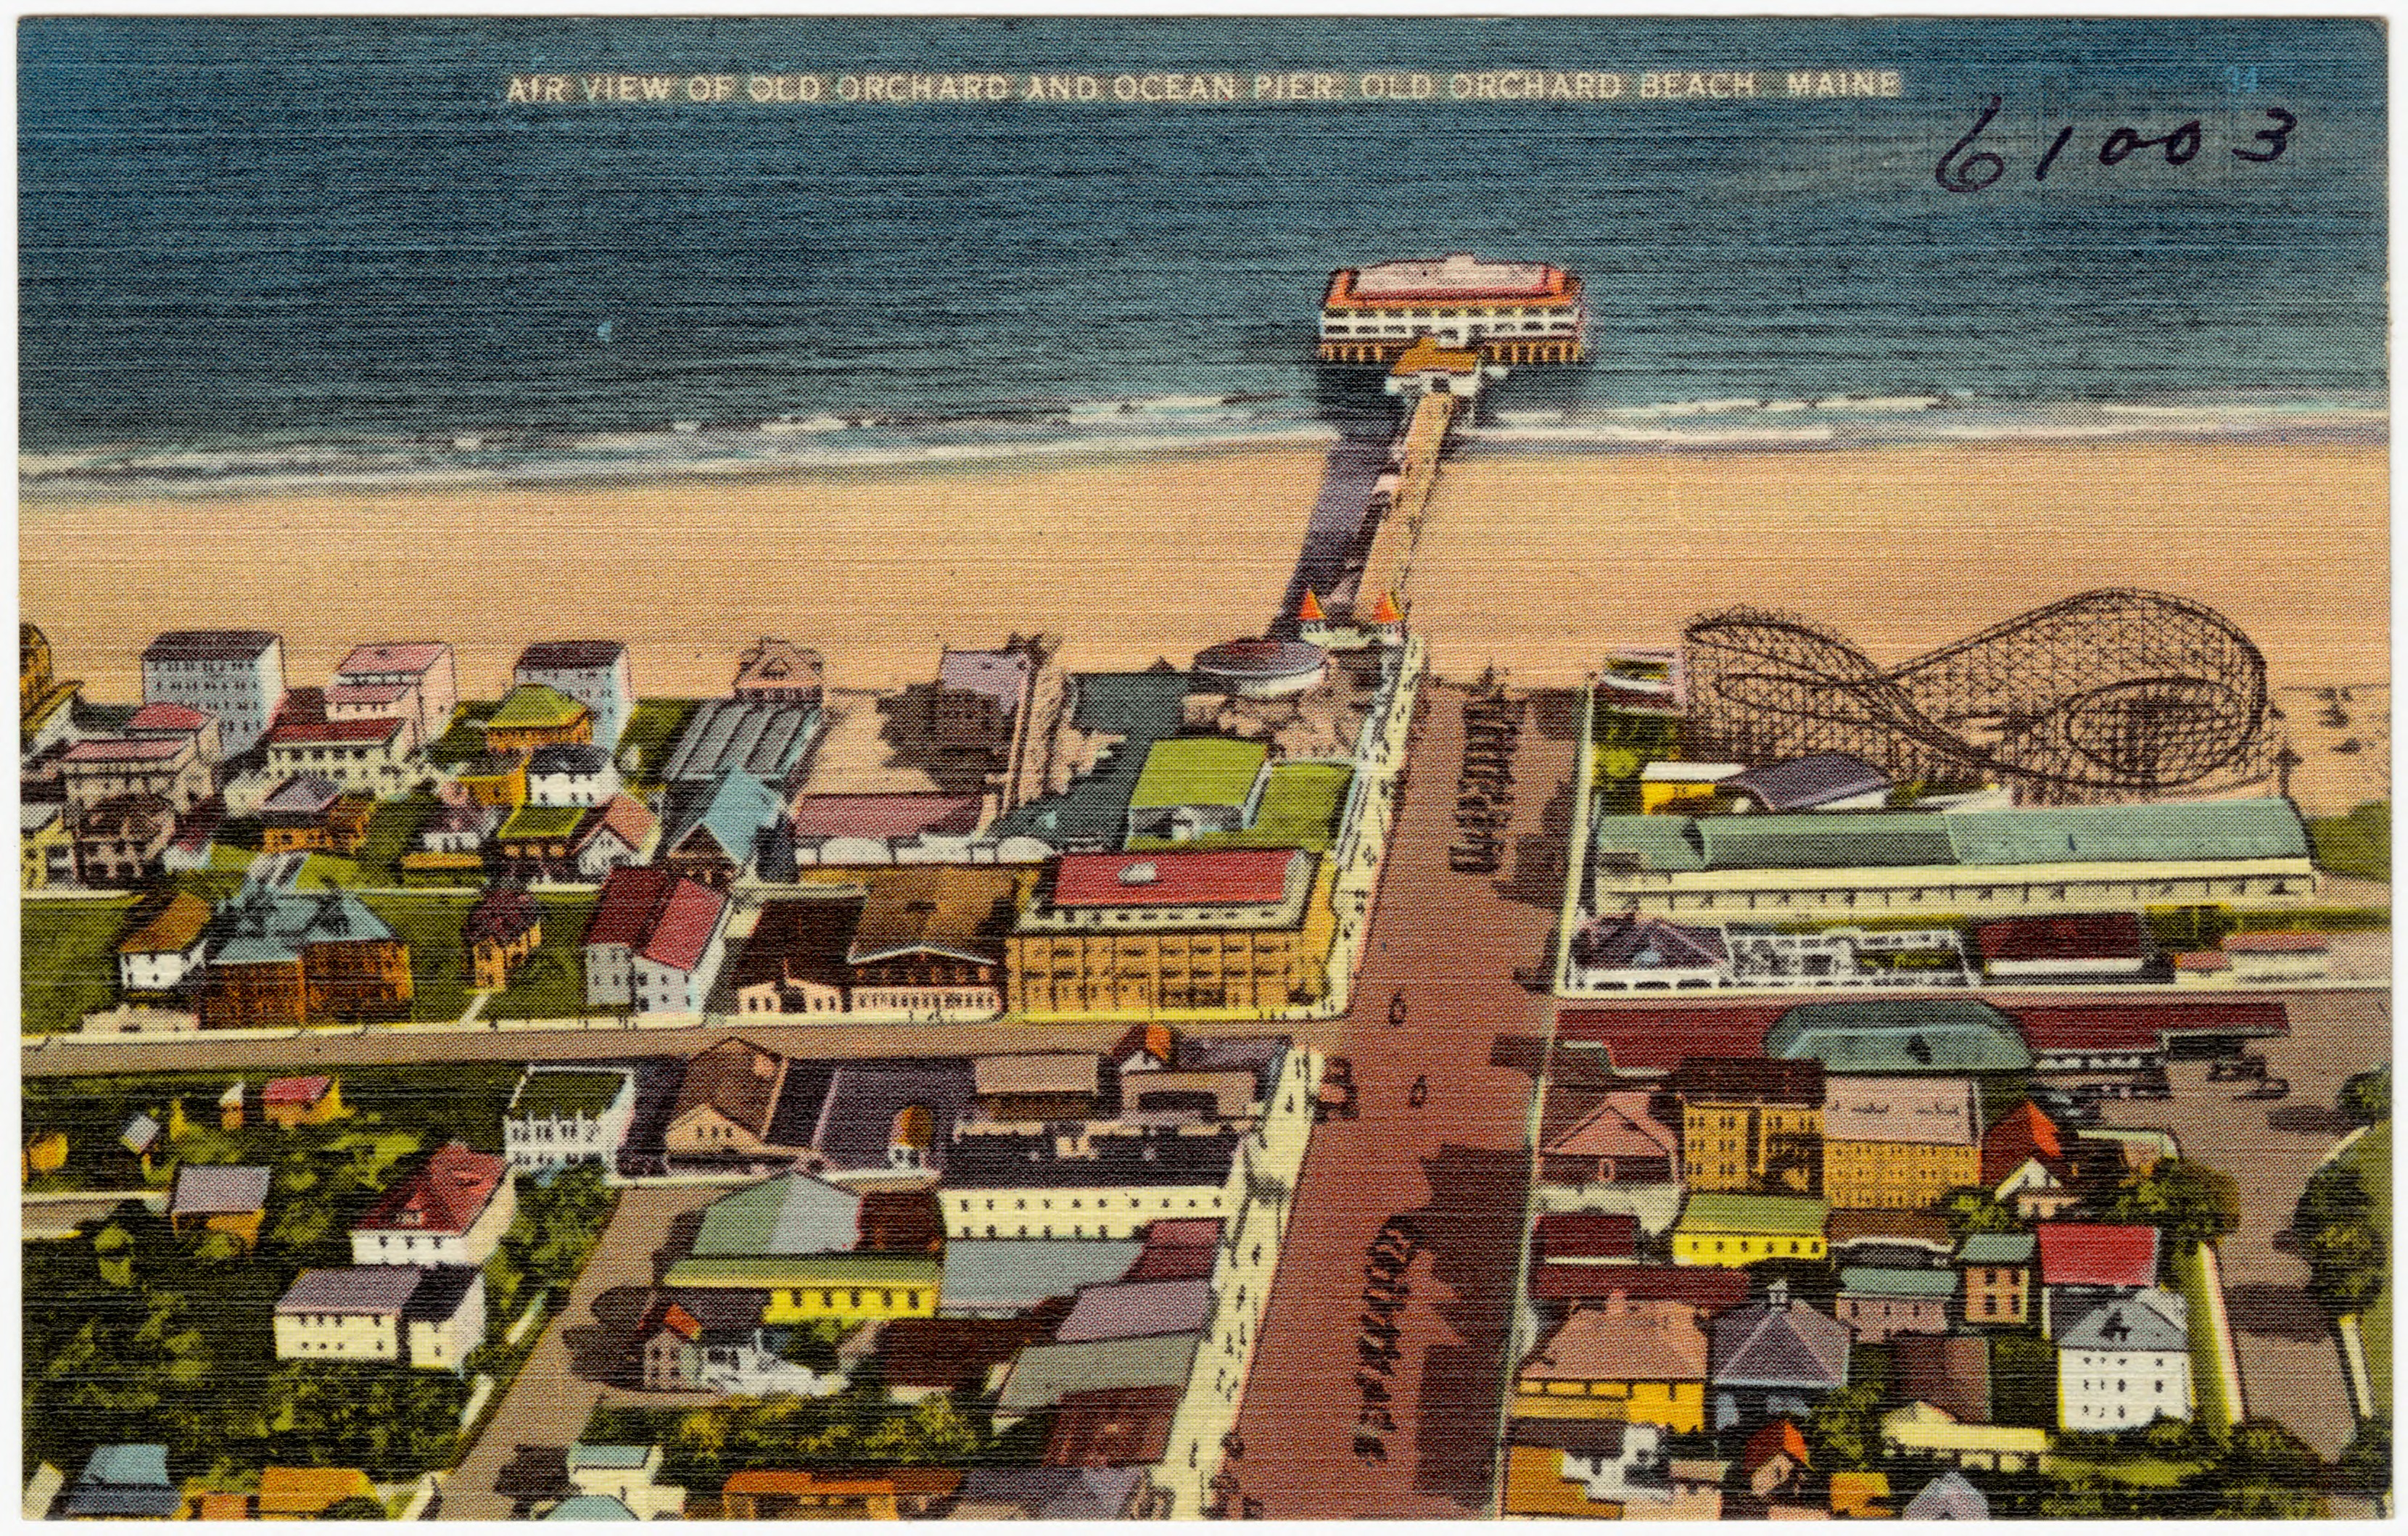 Air view of Old Orchard and Ocean Pier, Old Orchard Beach, Maine (61003).jp...